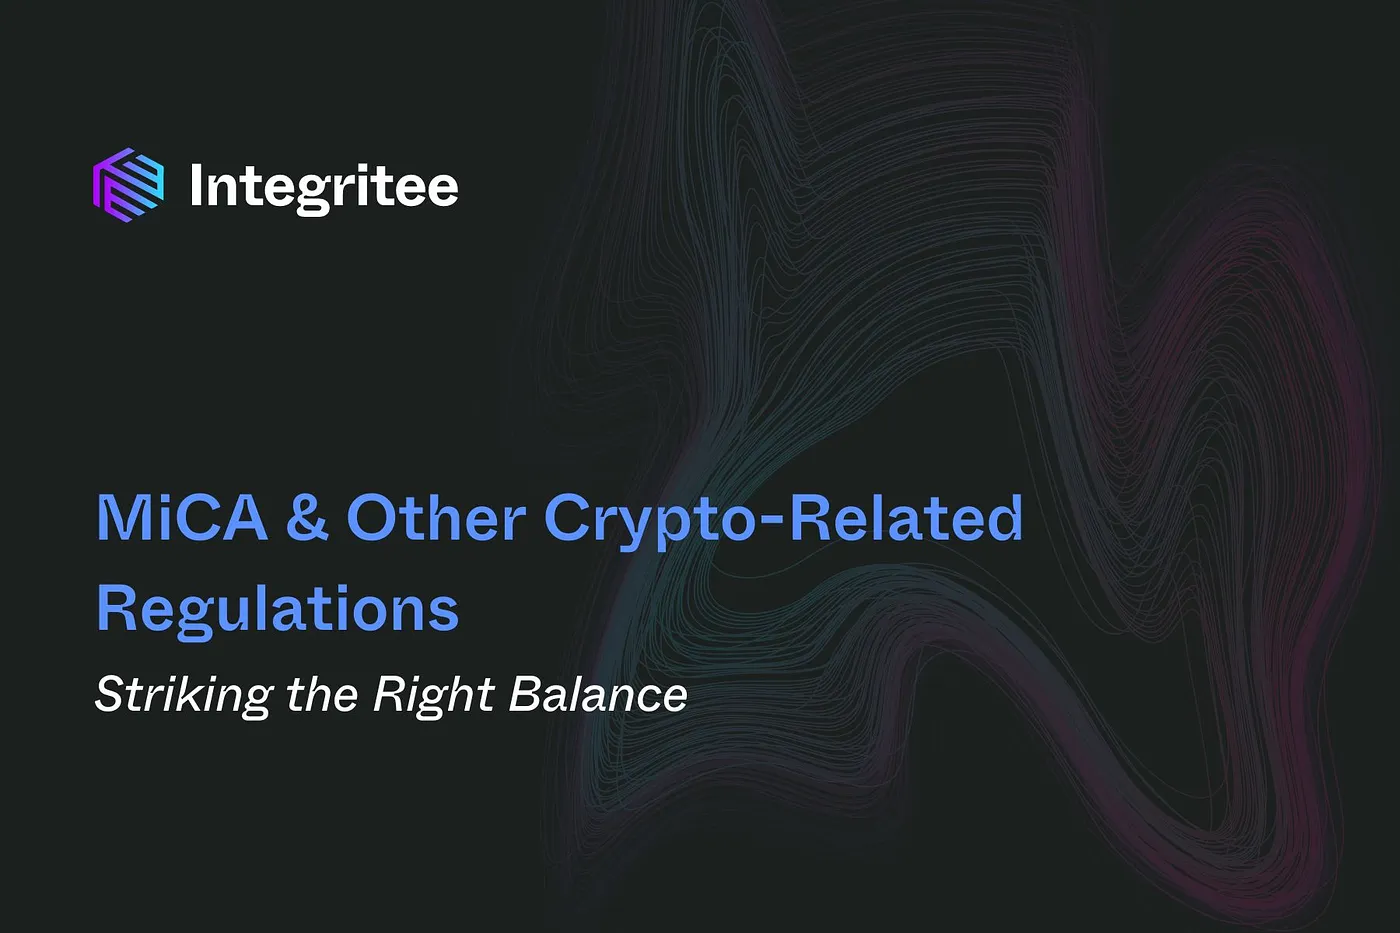 MiCA & Other Crypto-Related Regulations: Striking the Right Balance